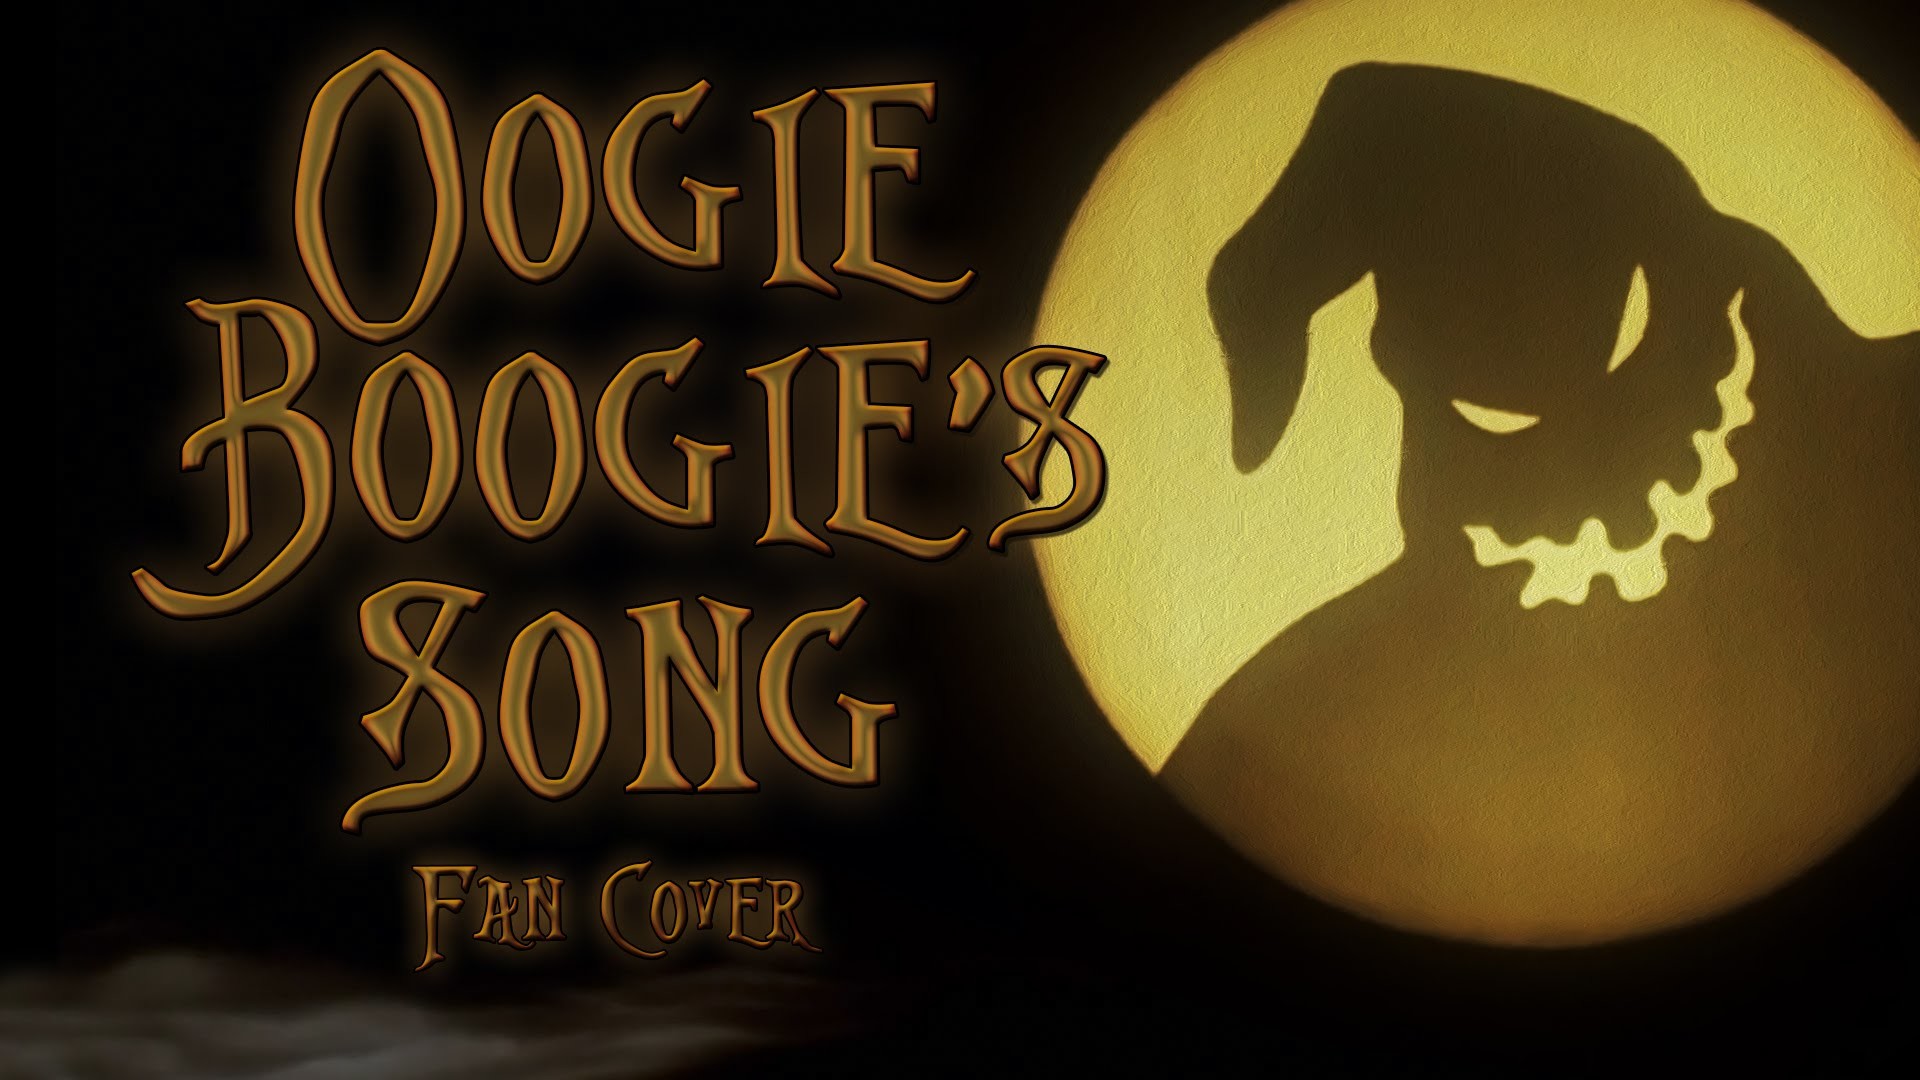 oogie boogie wallpaper,font,text,graphics,animation,logo